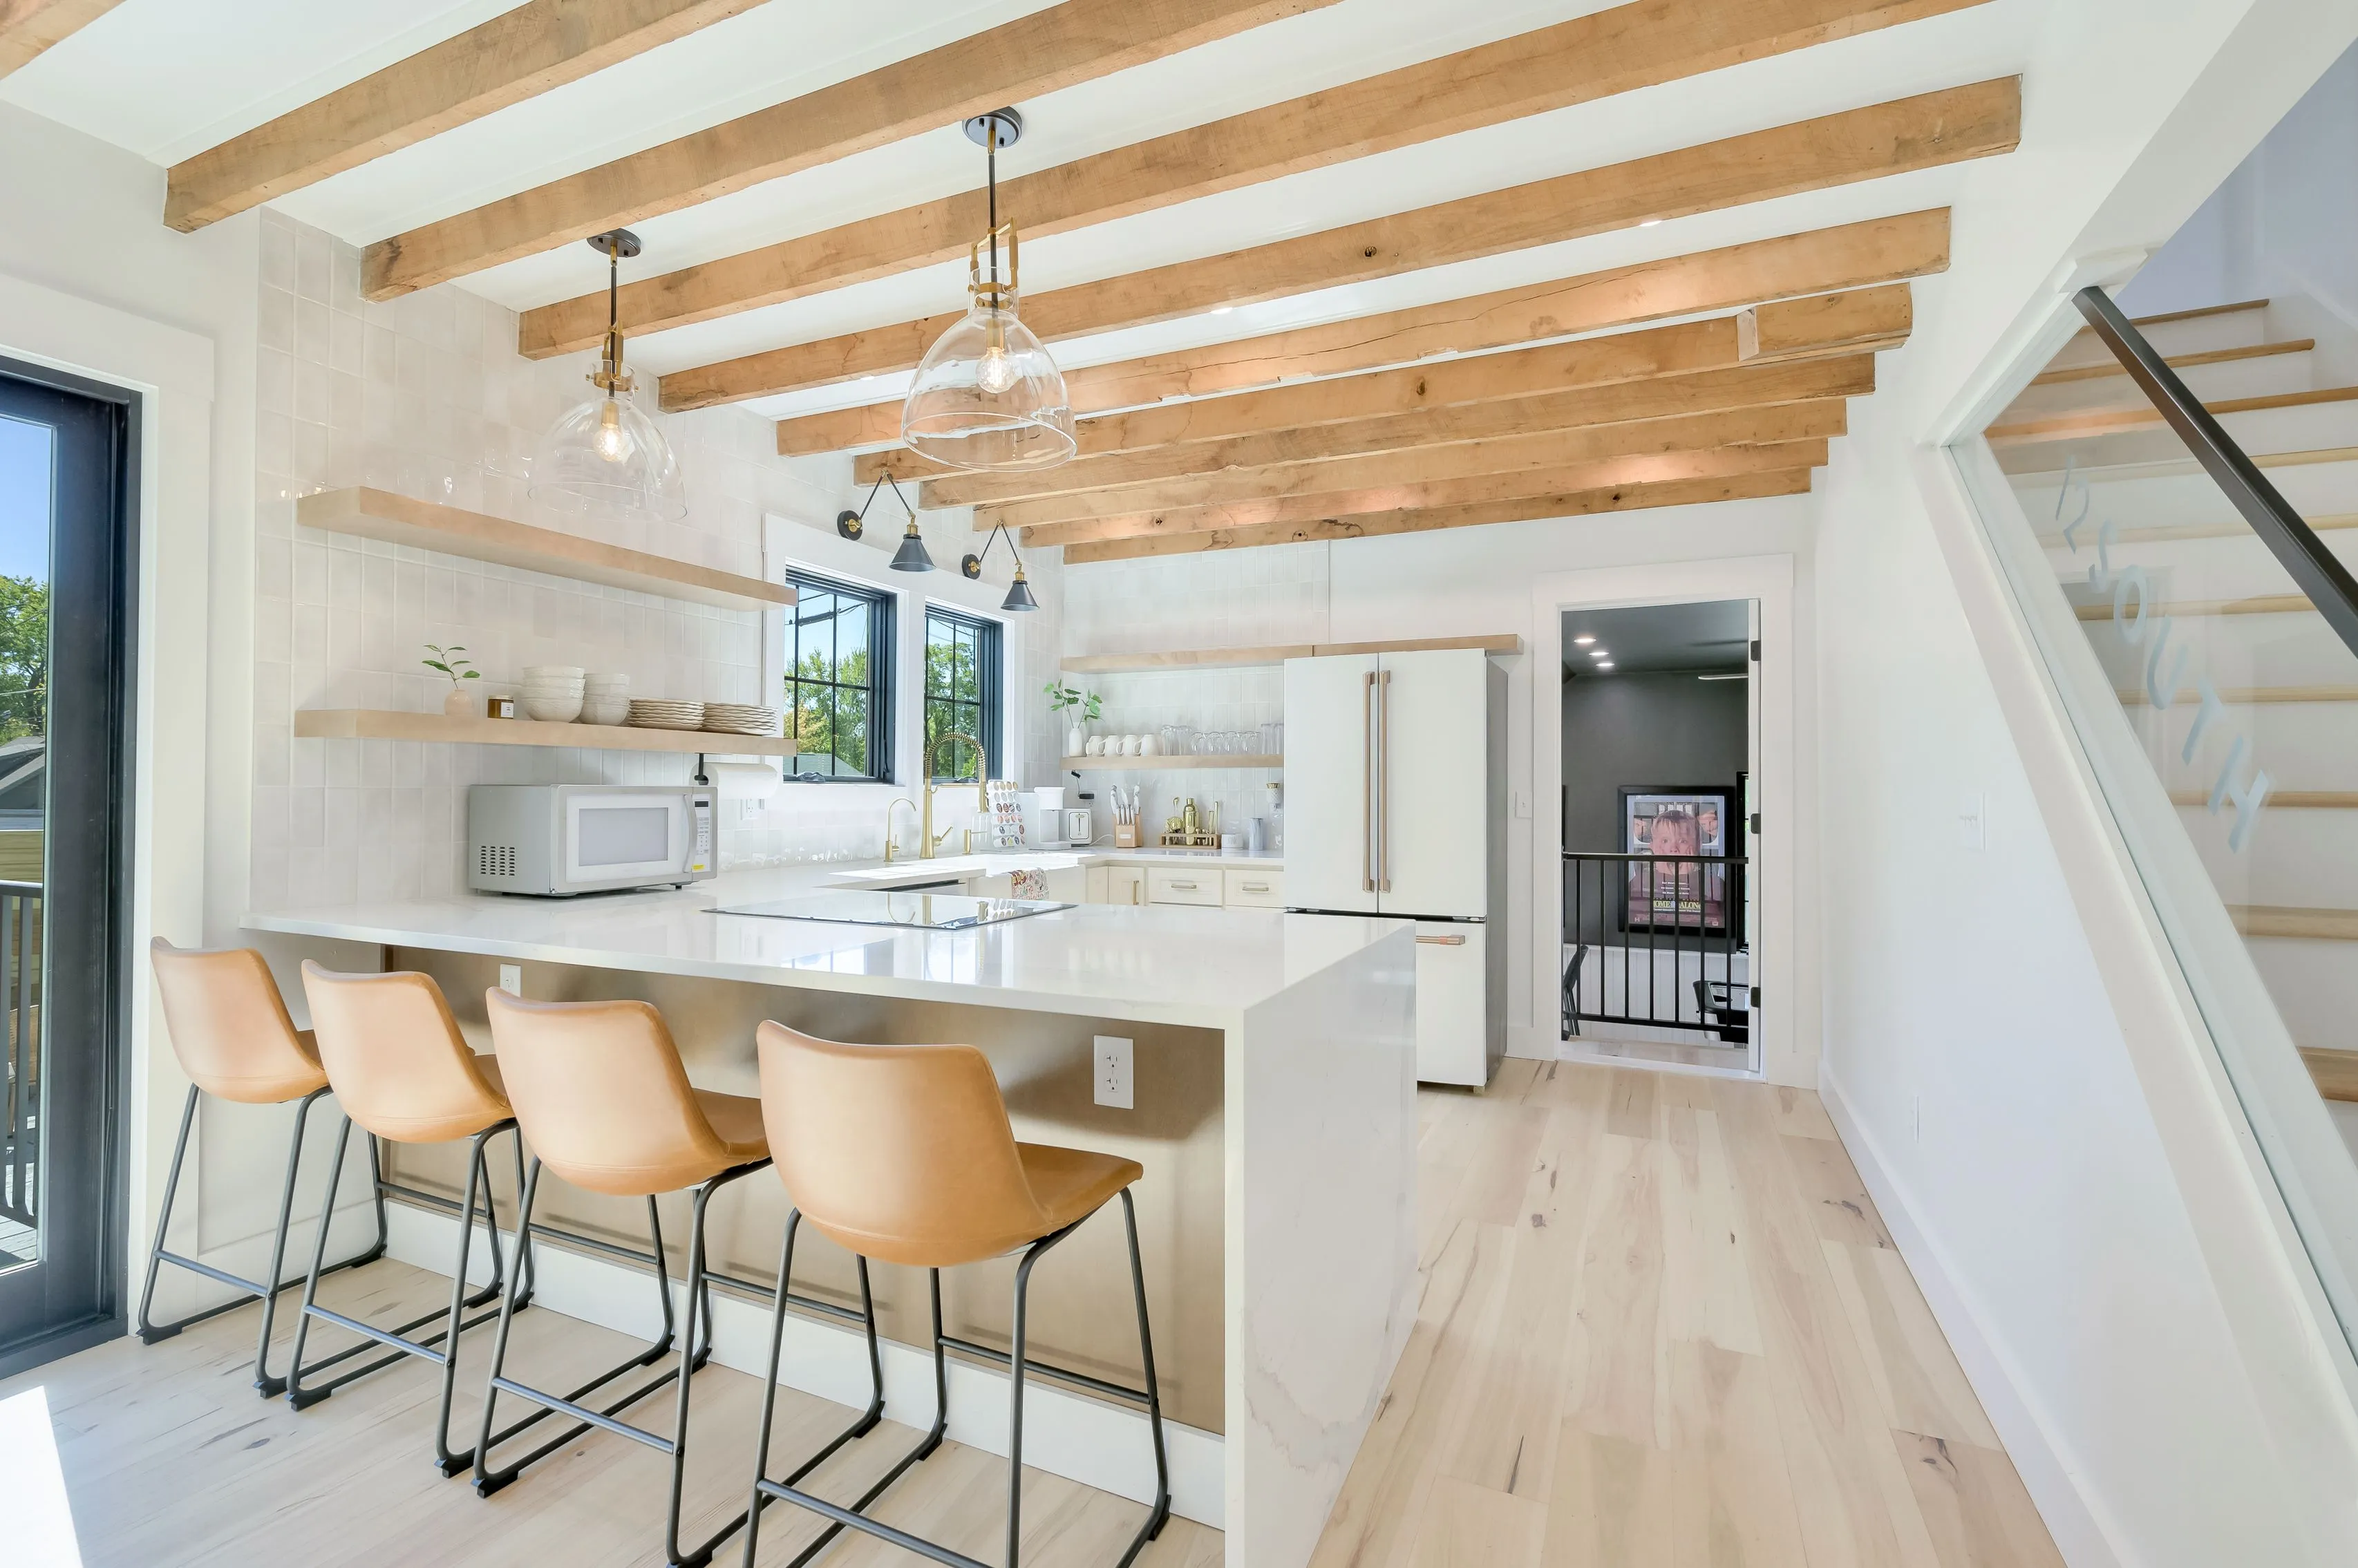 Bright modern kitchen with white countertops, wooden beams on the ceiling, and bar stools by the island.